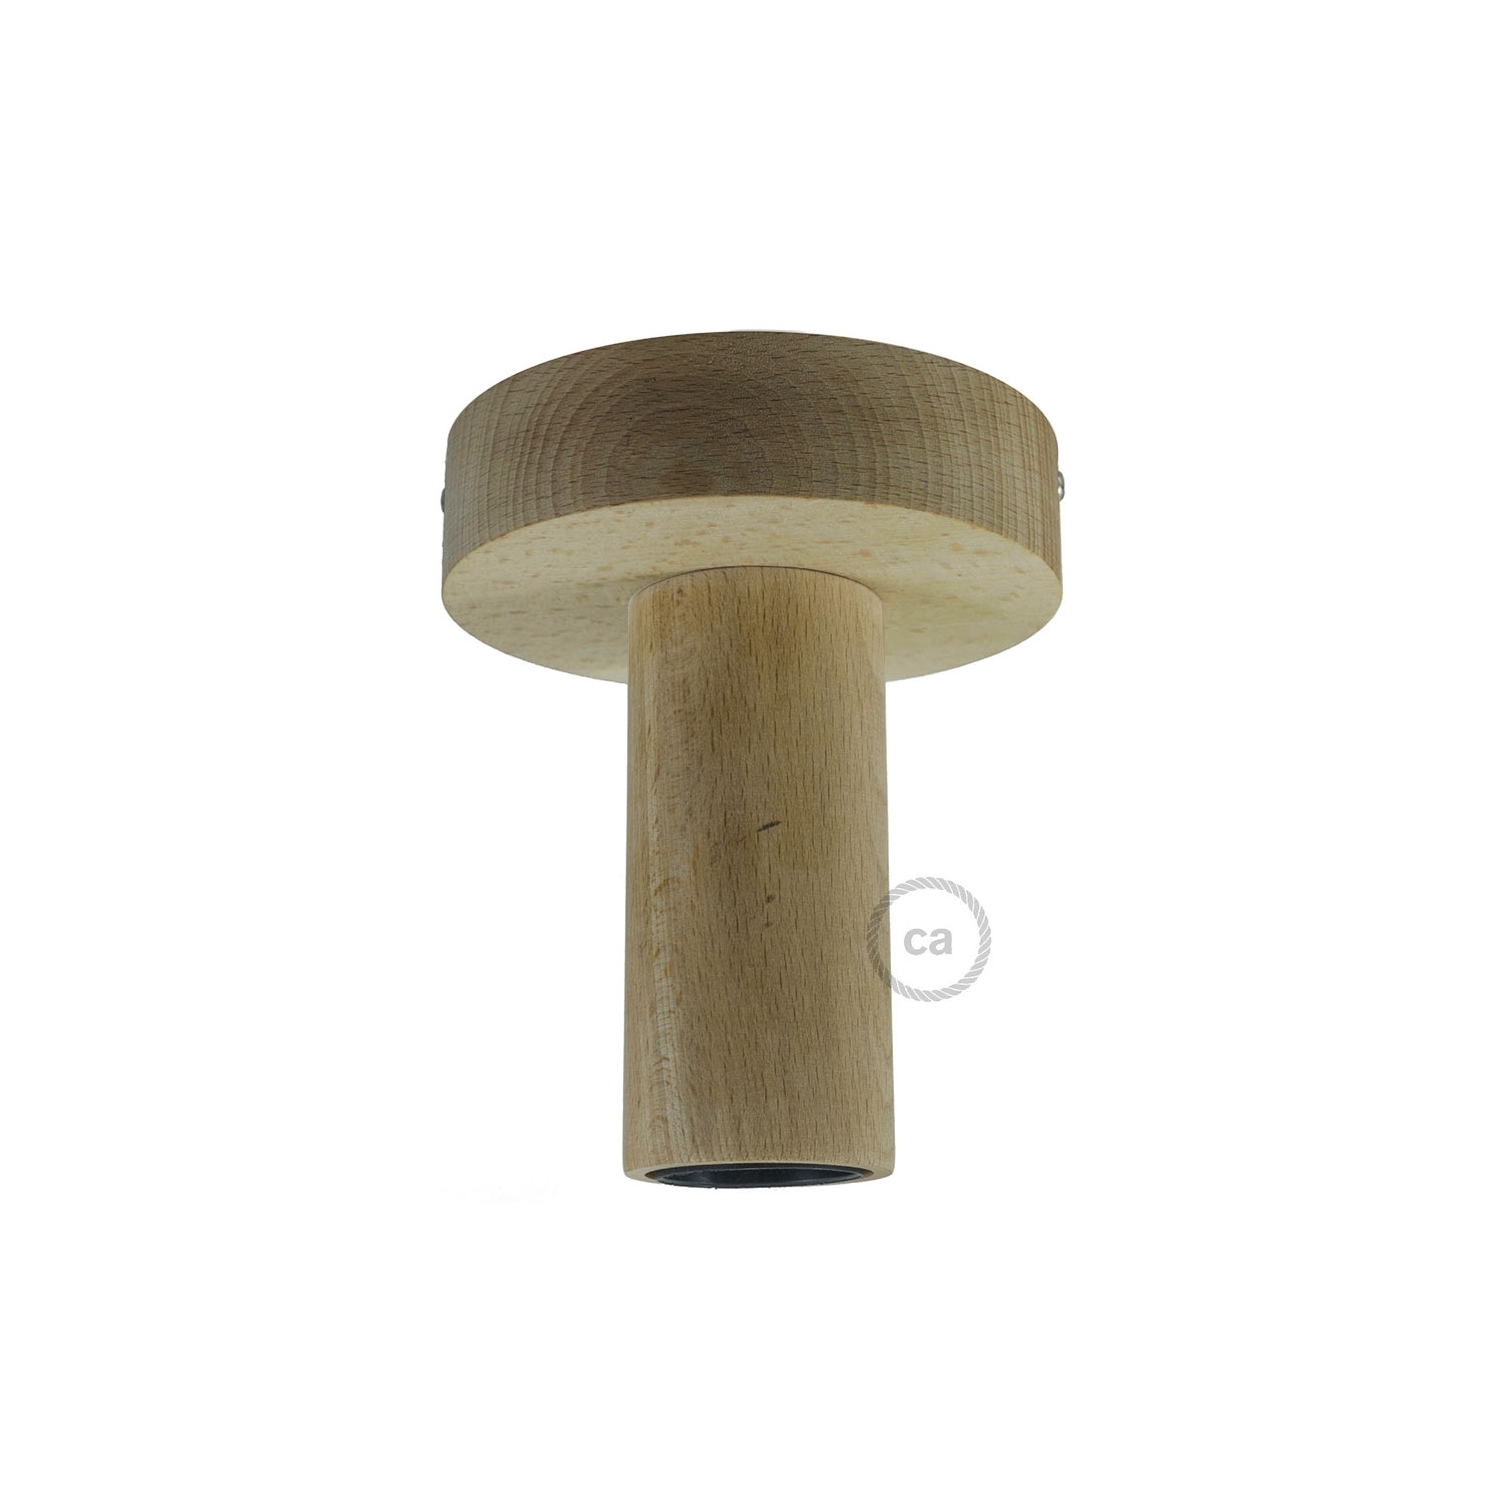 Natural Fermaluce, the natural wood flush light for your wall or ceiling, 5.6".